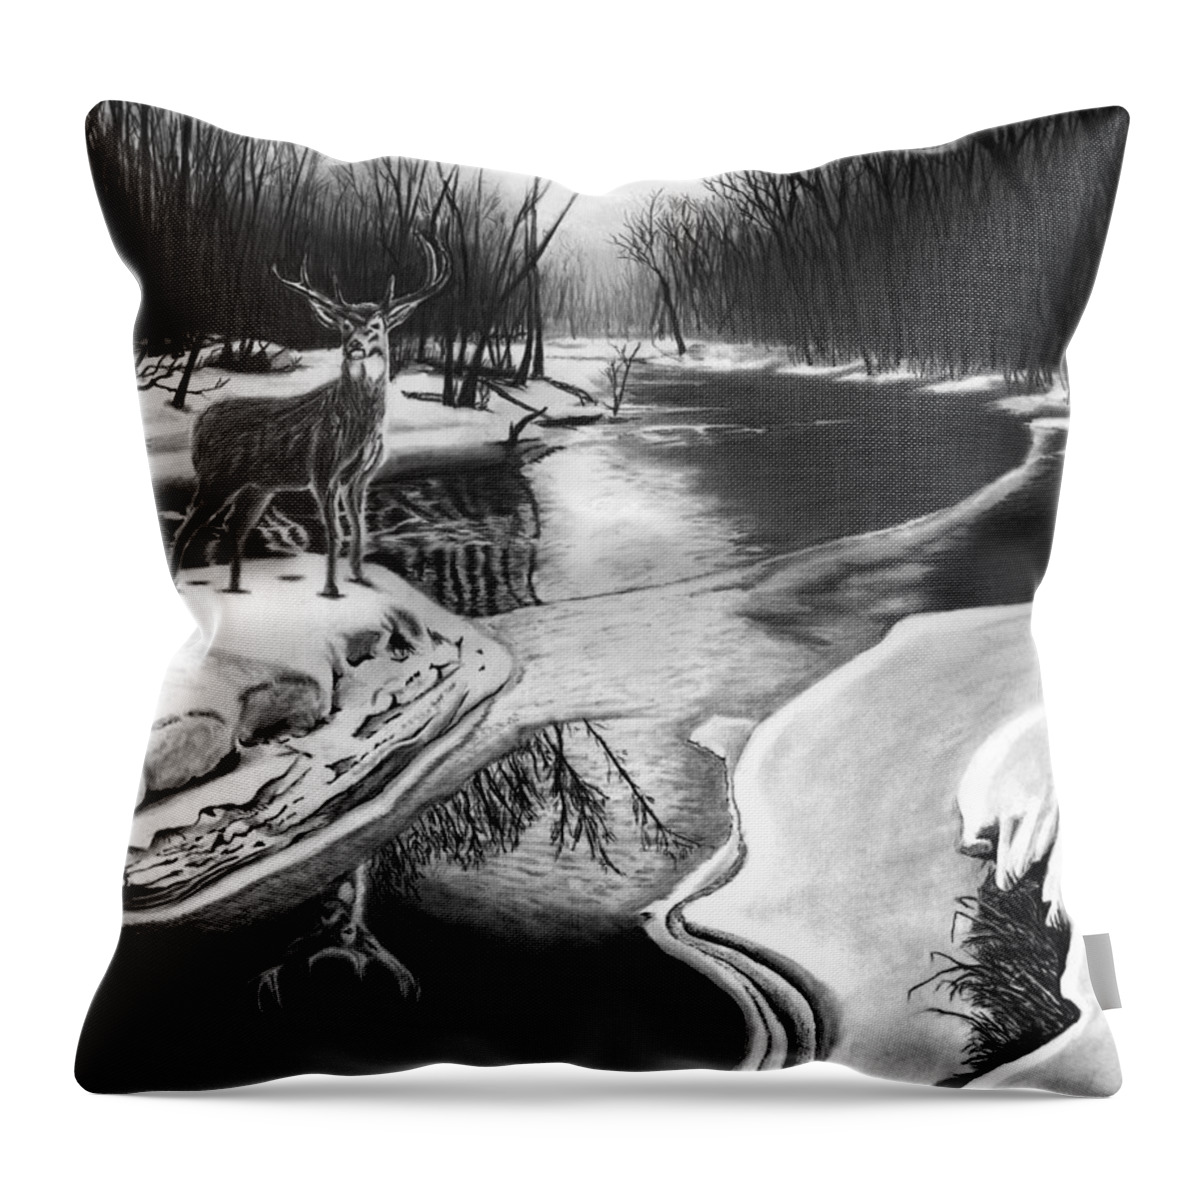 Morning Thaw Throw Pillow featuring the drawing Morning Thaw by Peter Piatt